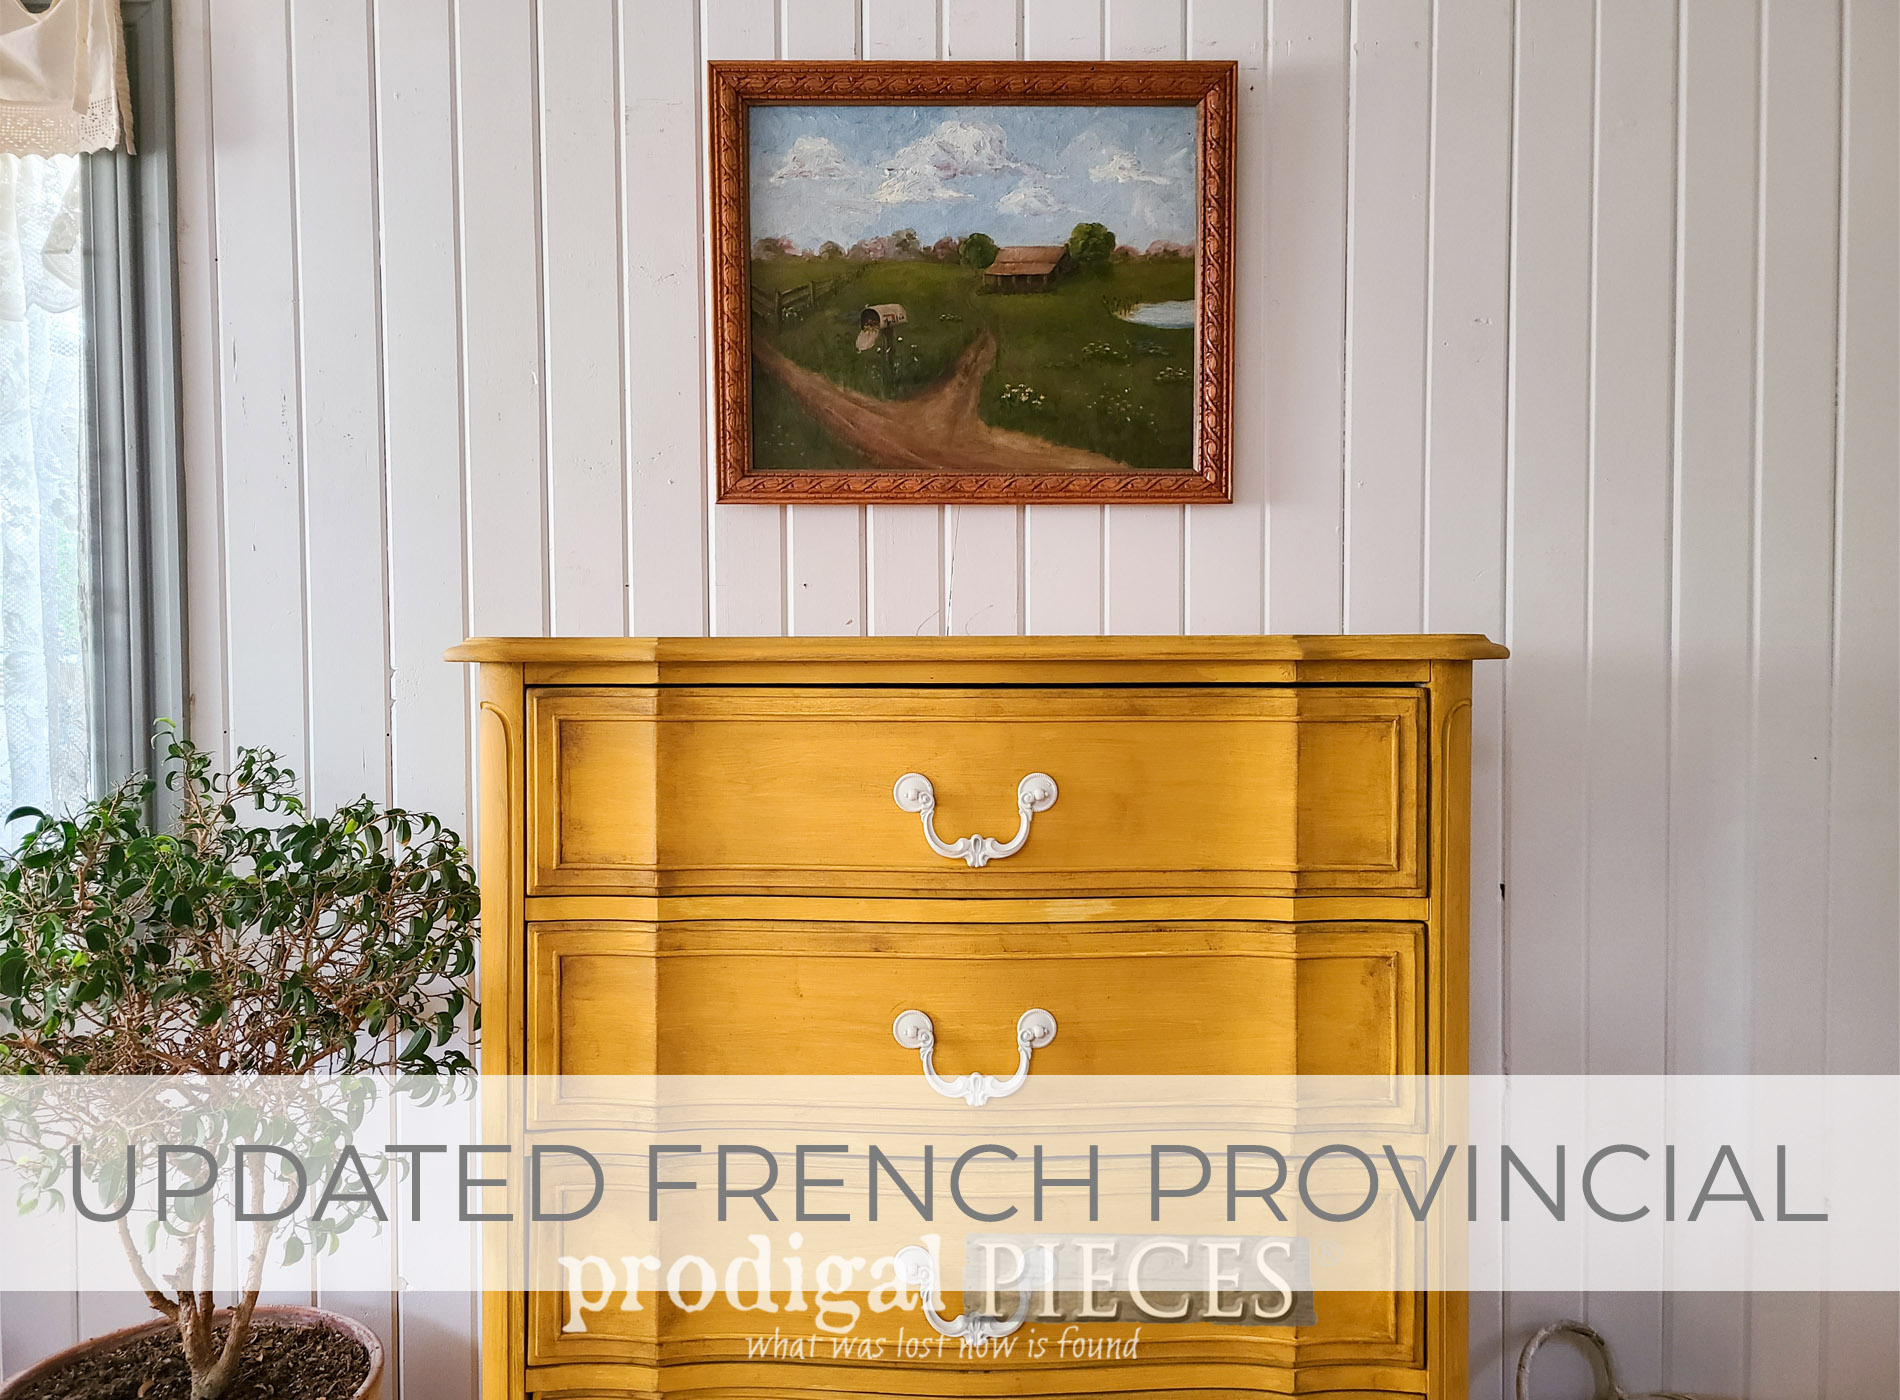 Showcase Updated French Provincial Chest of Drawers by Larissa of Prodigal Pieces | prodigalpieces.com #prodigalpieces